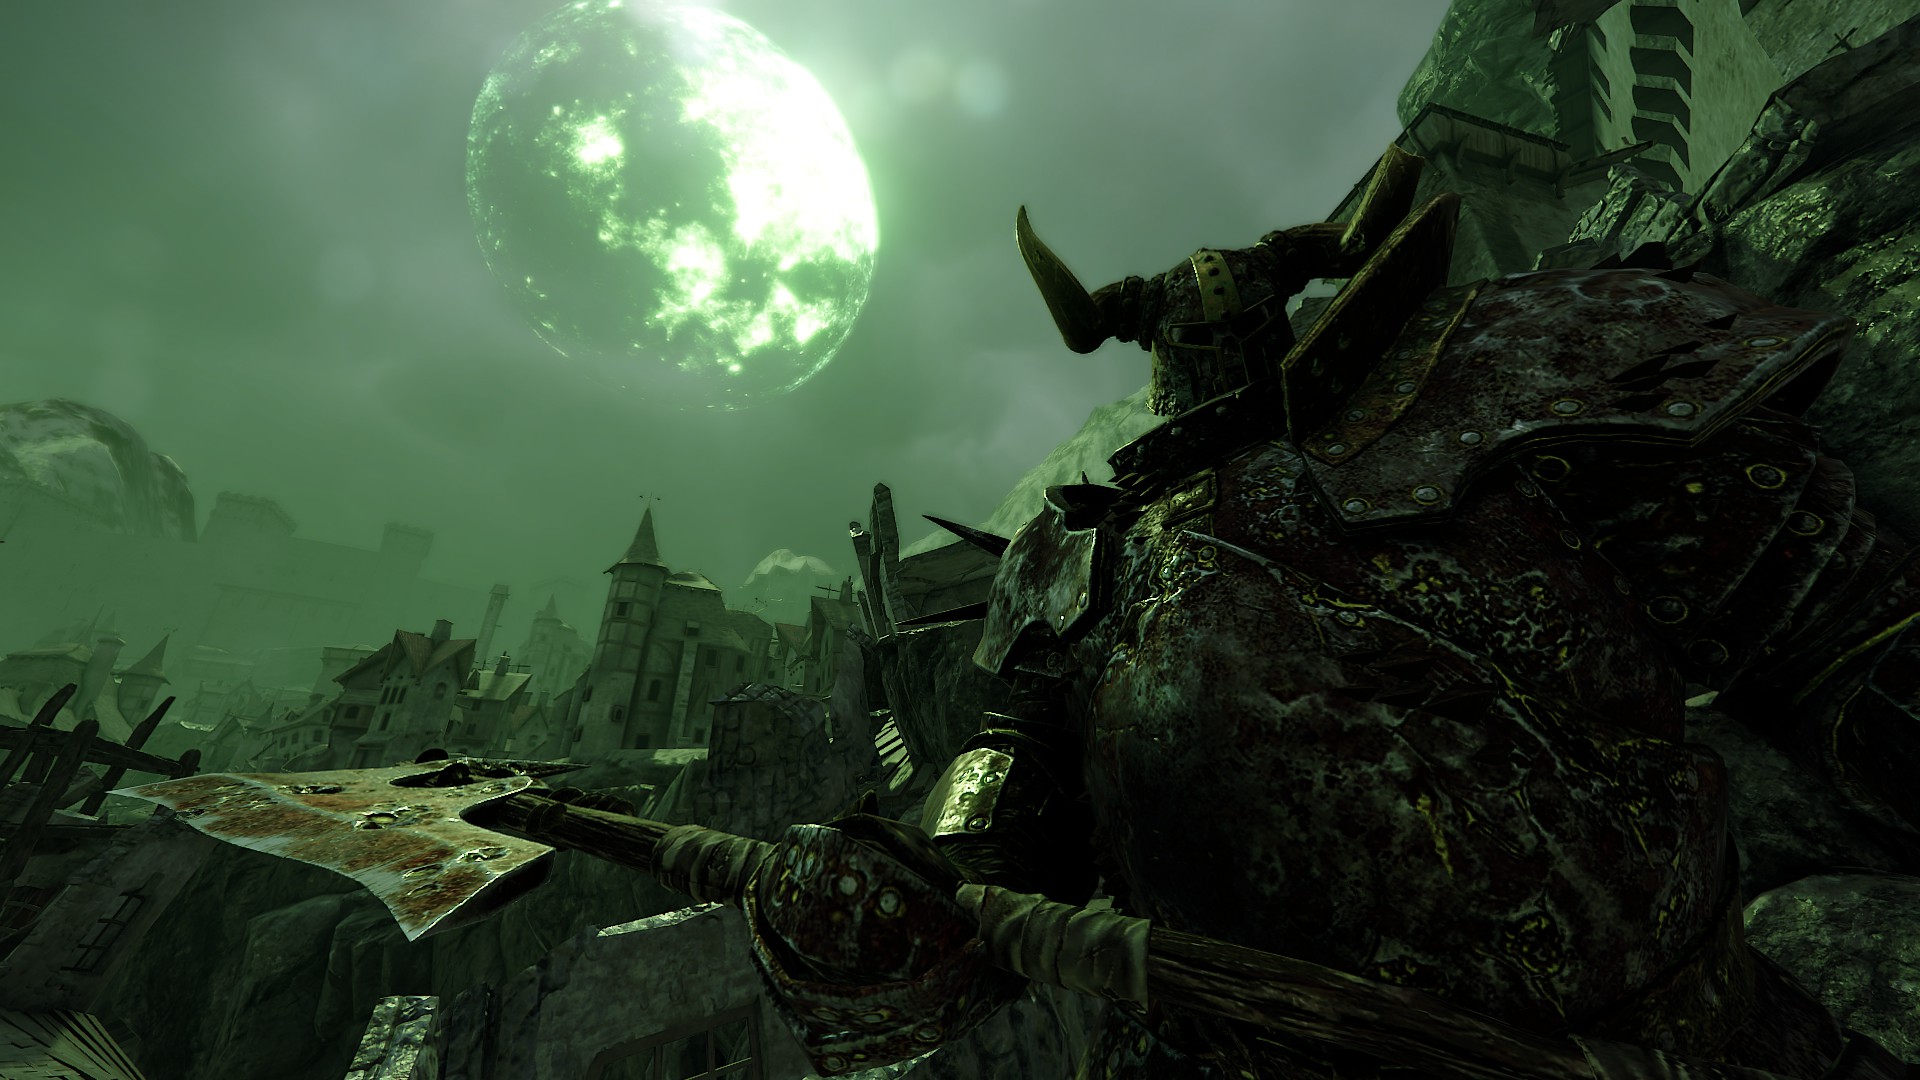 Vermintide 2s Photomode mod lets you pose your own Warhammer art